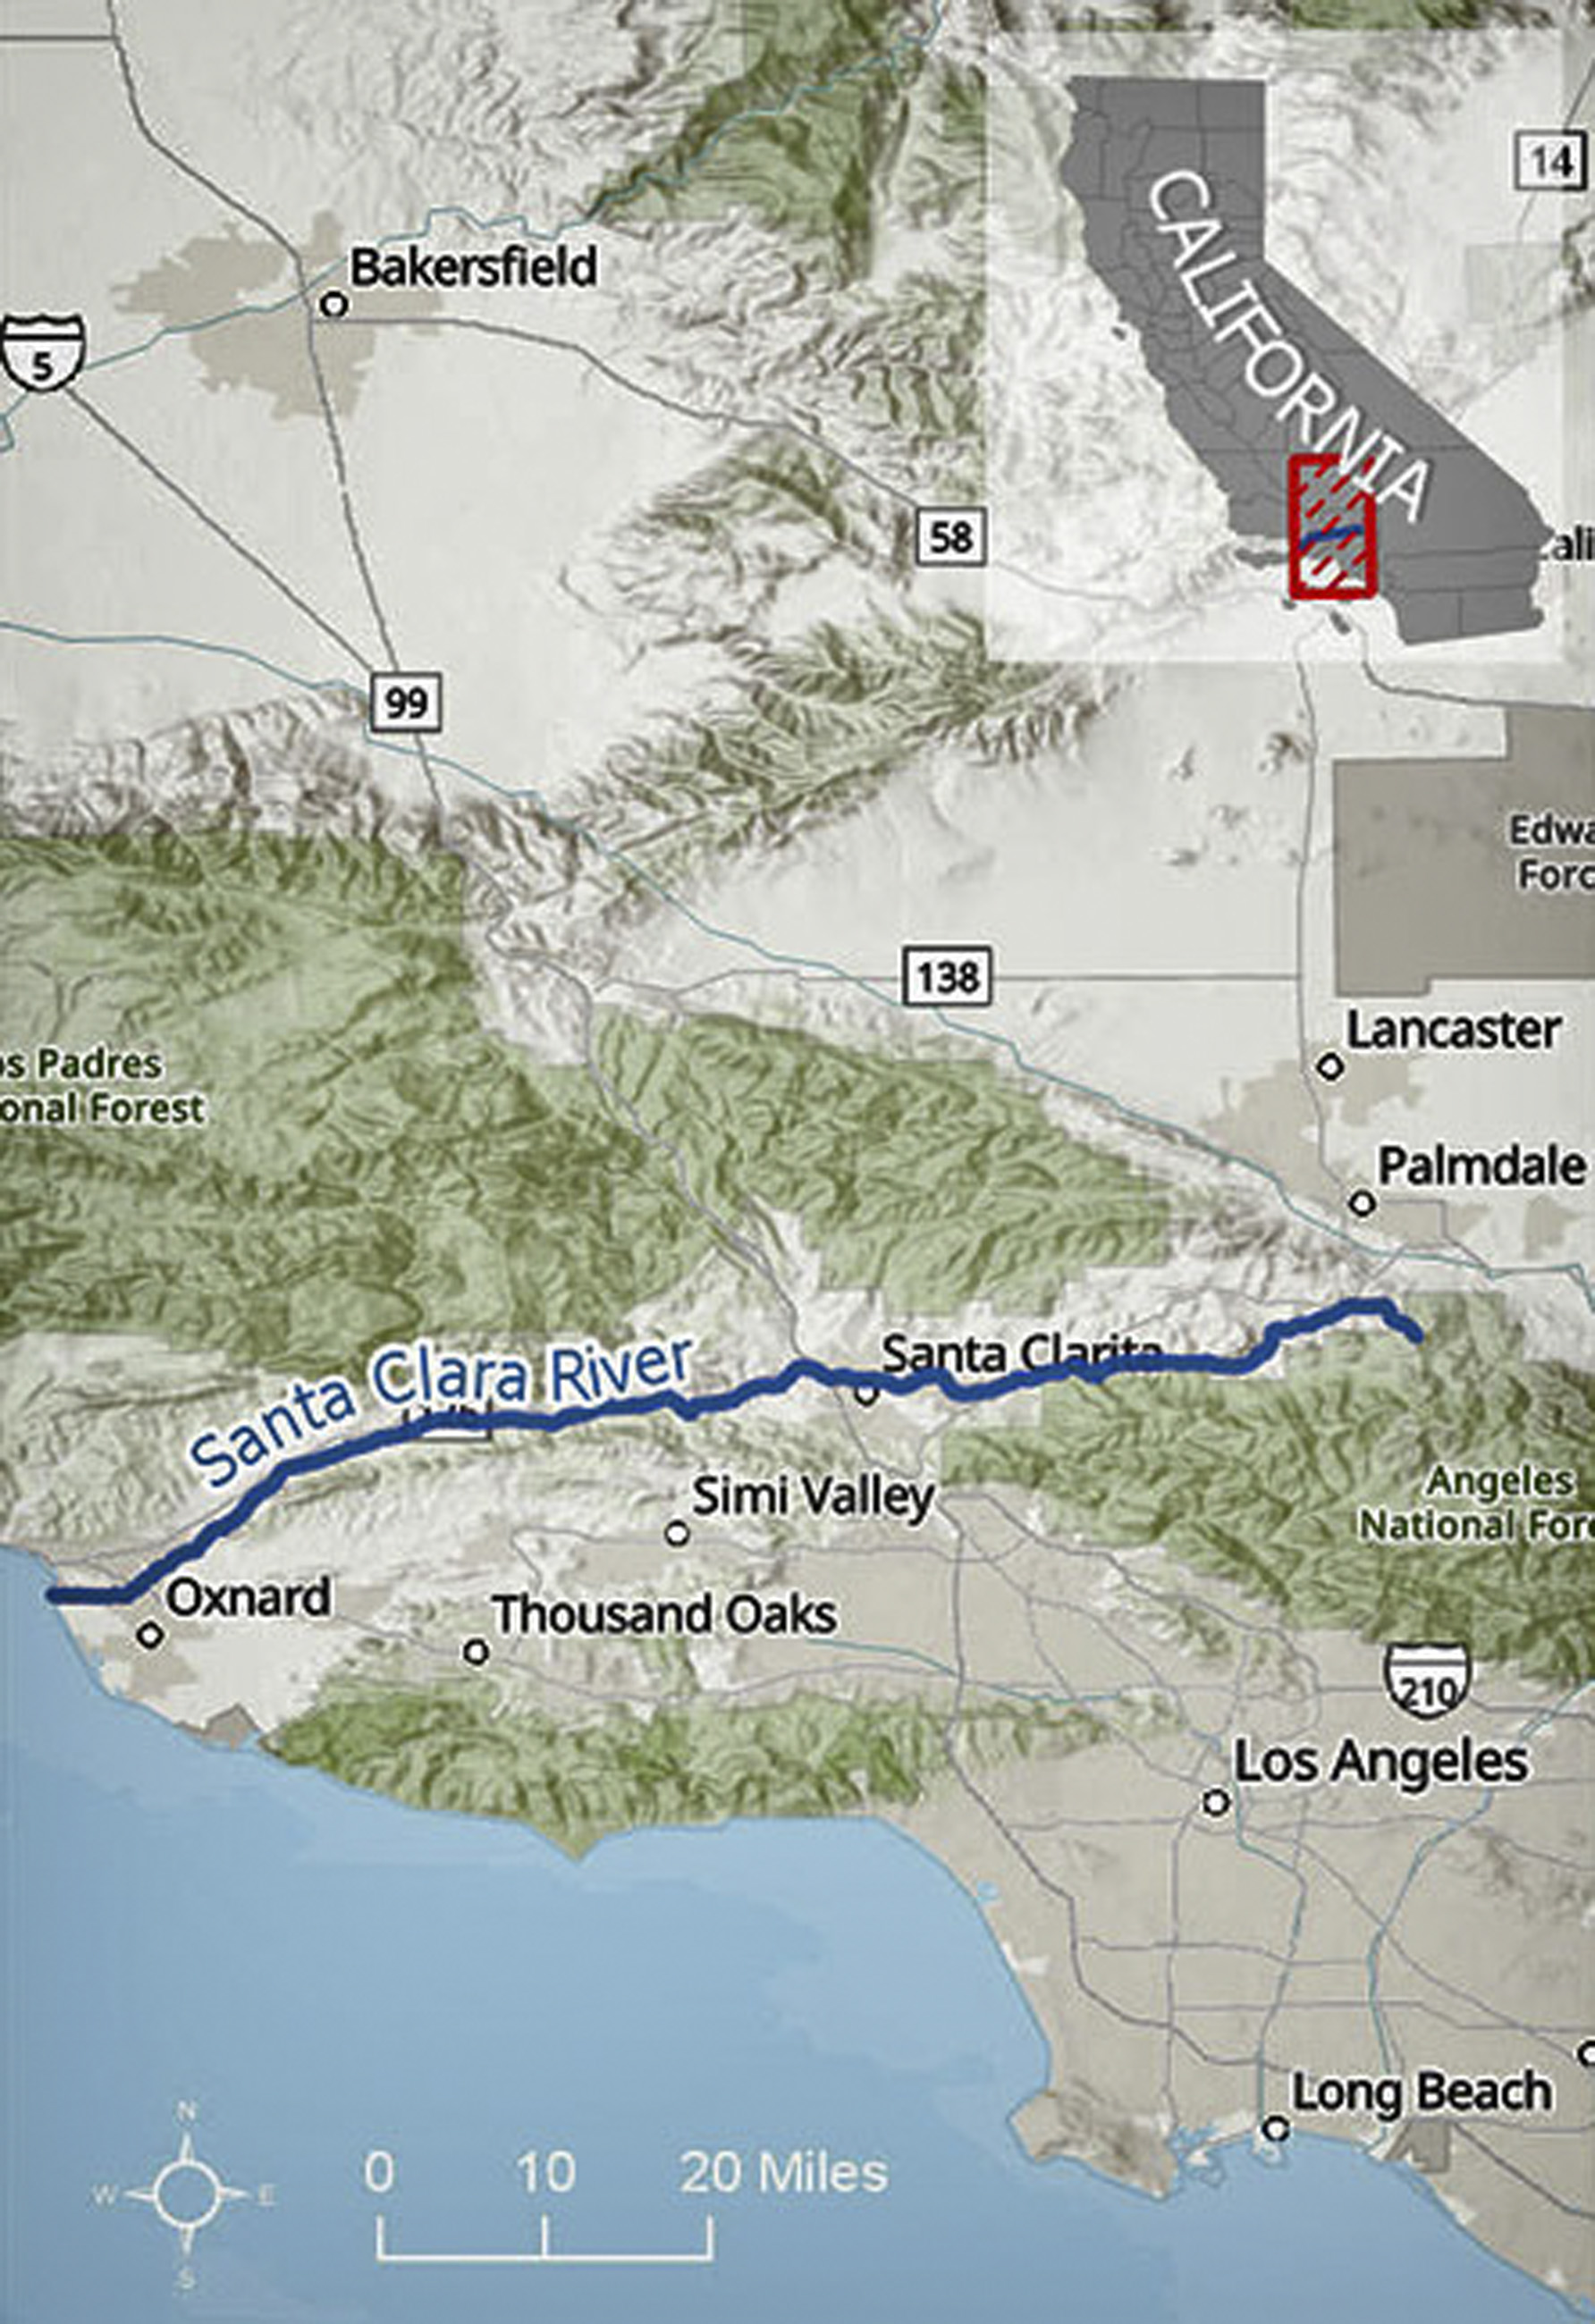 A map of the Santa Clara River in Los Angeles and Ventura counties